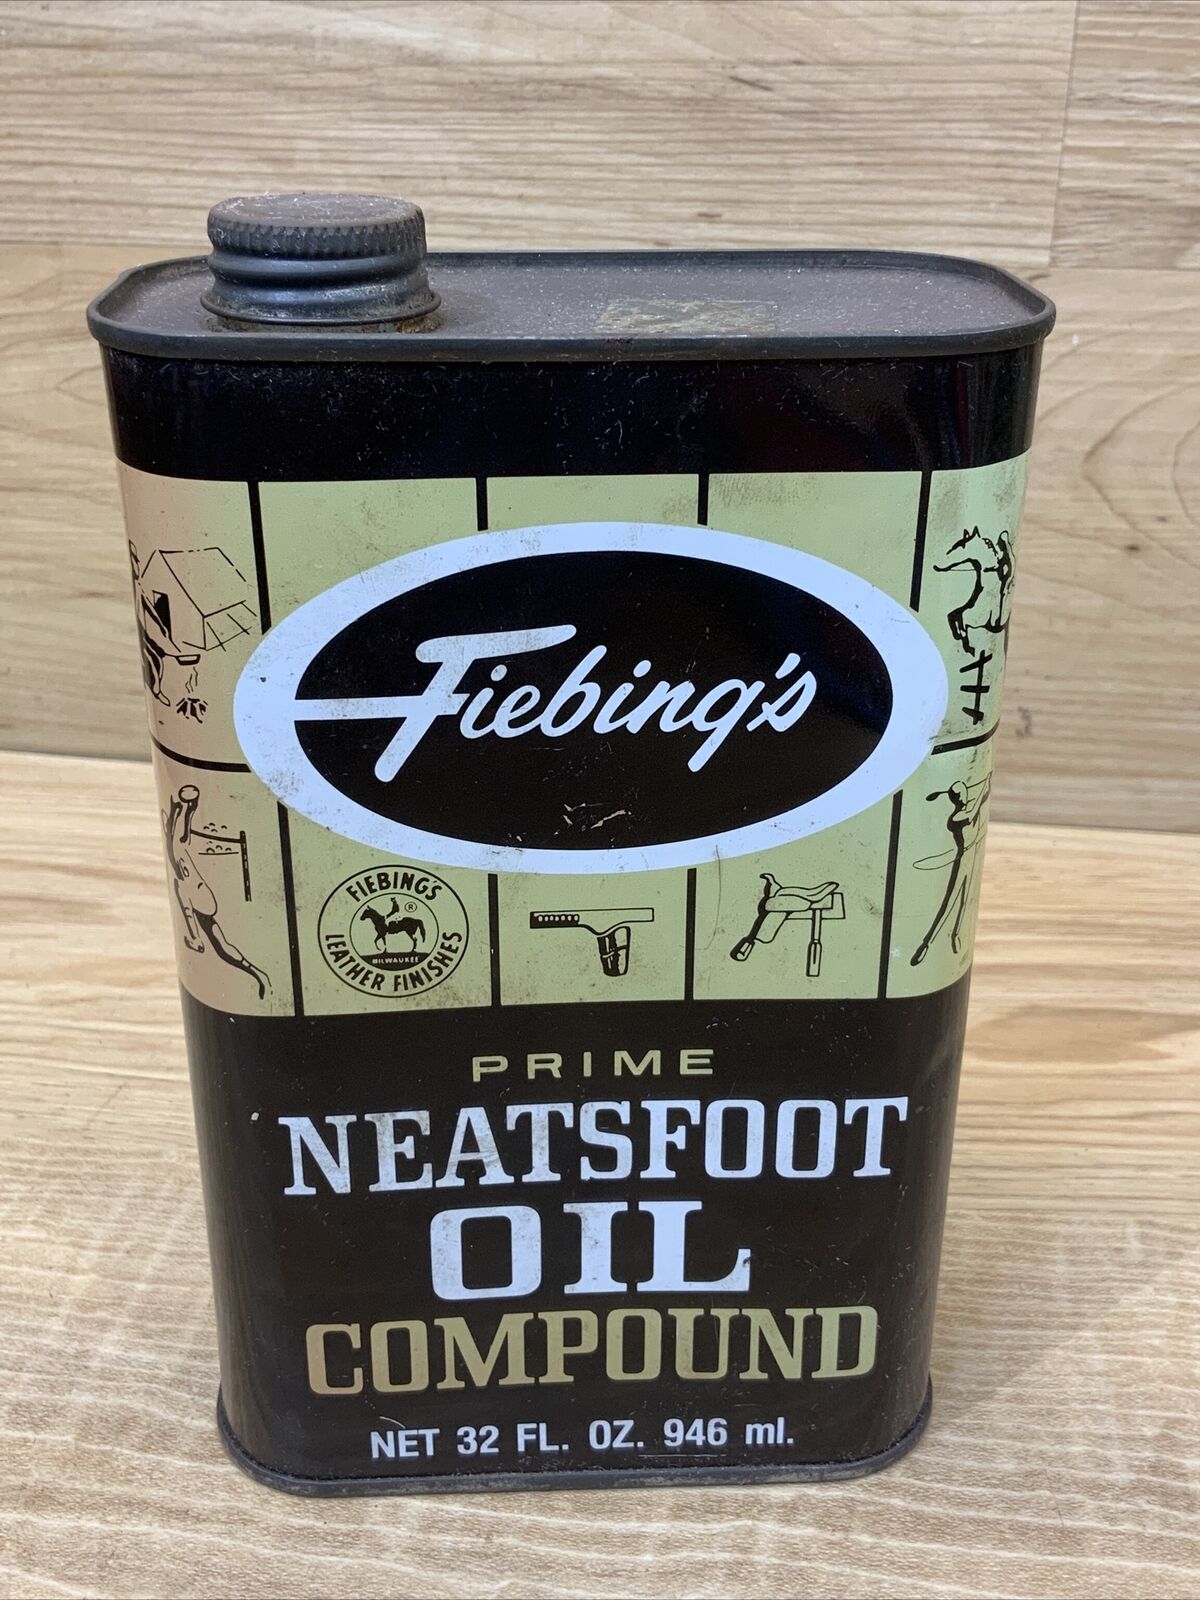 Vintage Fiebings Neatsfoot Oil Compound 32 FL. Oz. Can 90% (Full)￼ Advertising